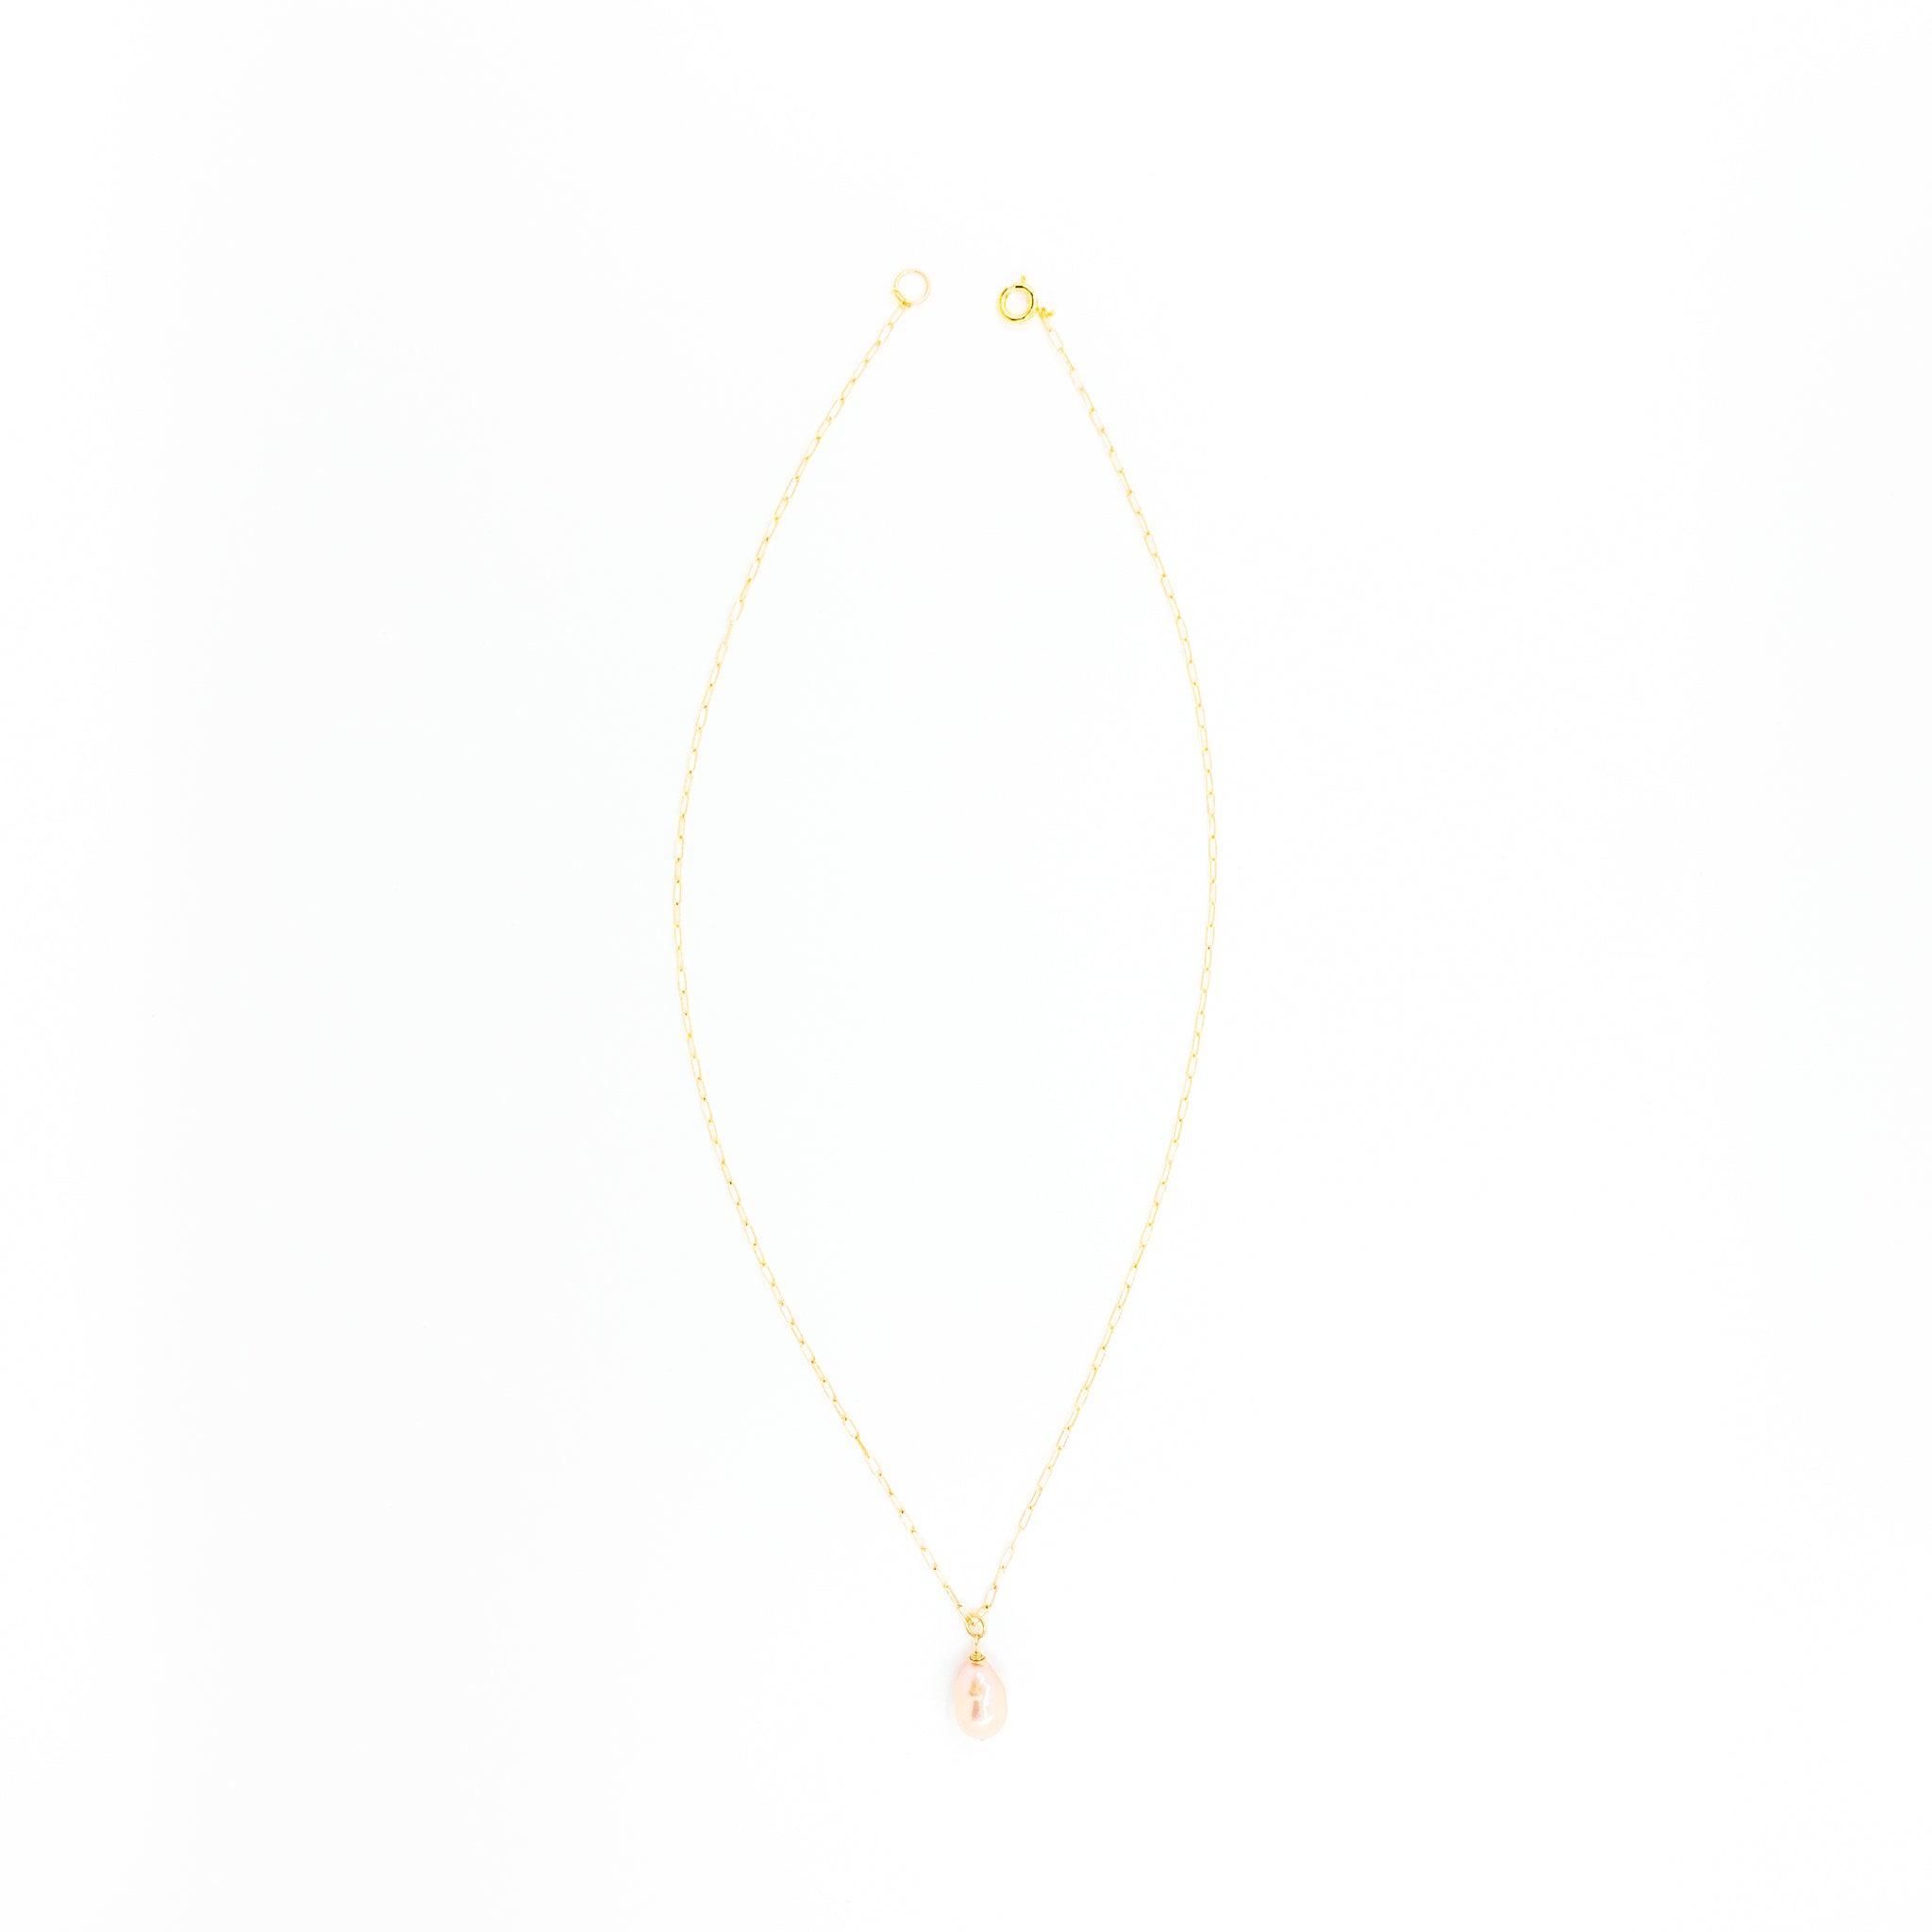 simple gold chain natural color pink baroque pearl necklace by eve black jewelry made in Hawaii  Edit alt text